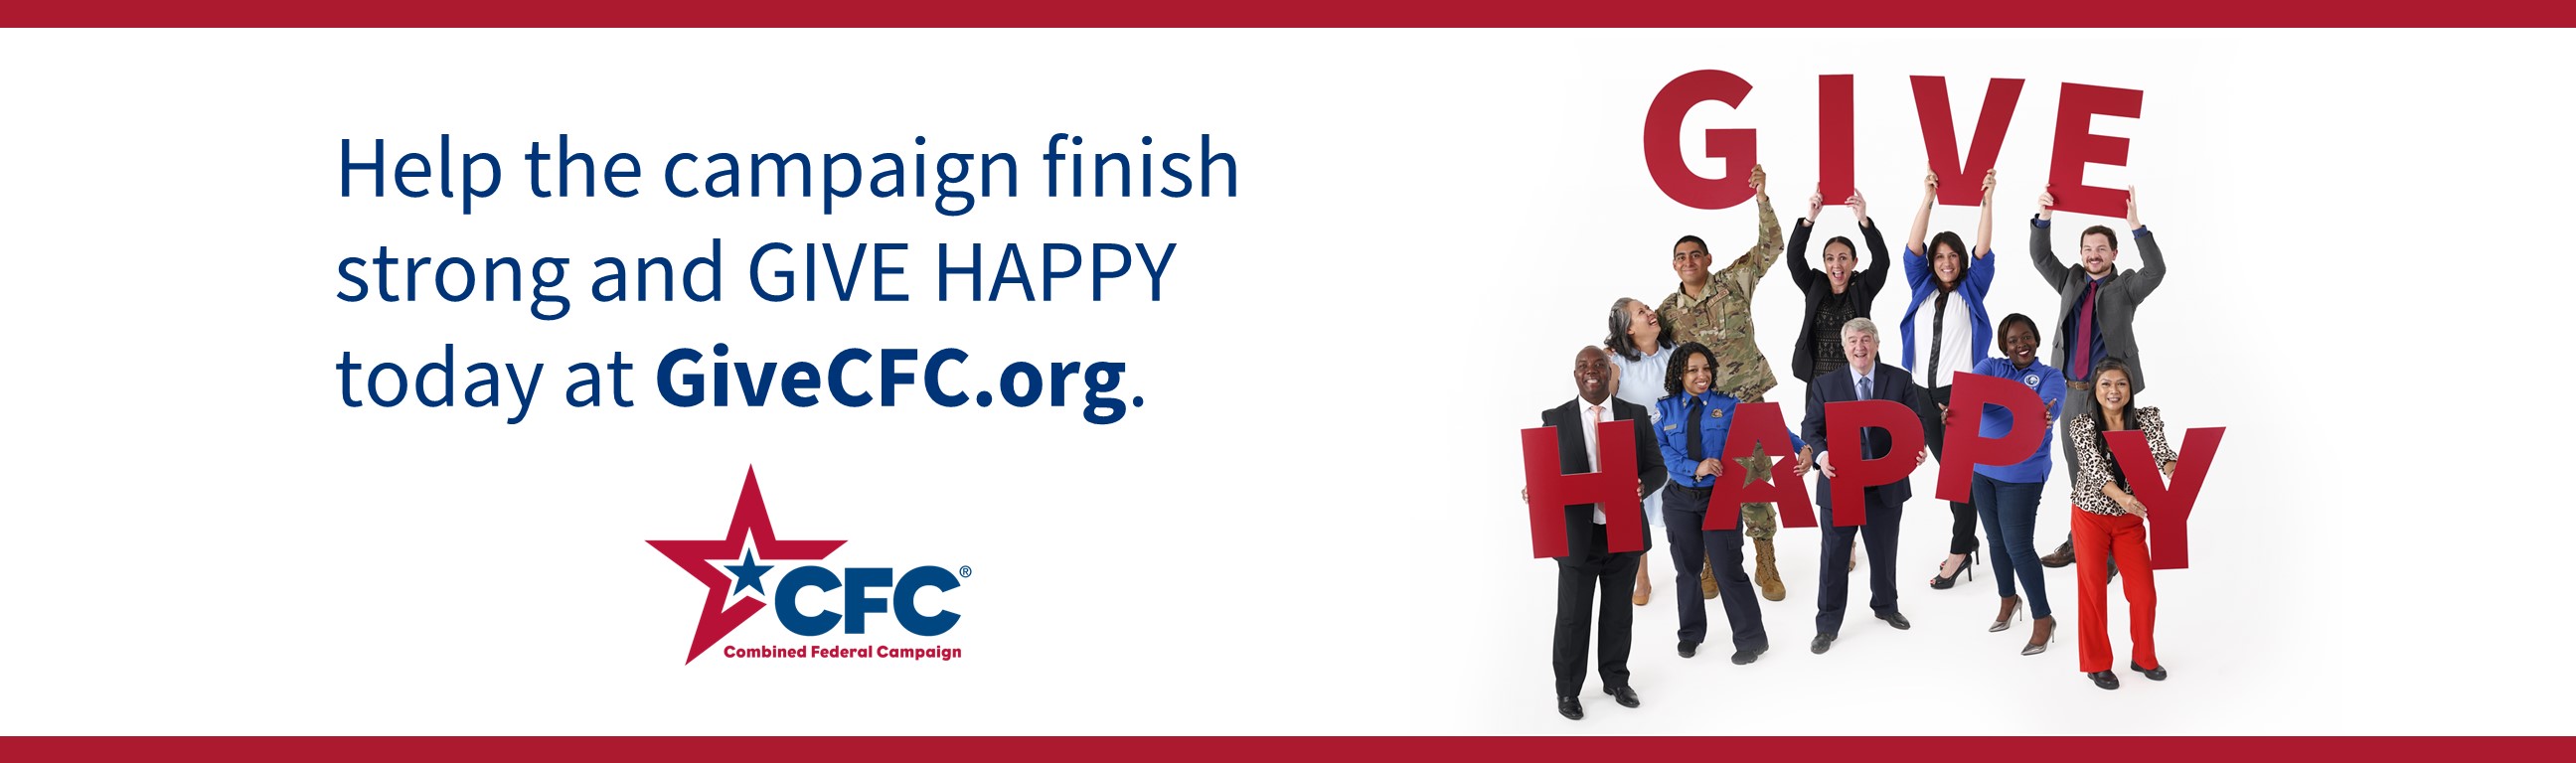 Help the campaign finish strong and GIVE HAPPY today at GiveCFC.org and a photo of Federal employees holding GIVE HAPPY.